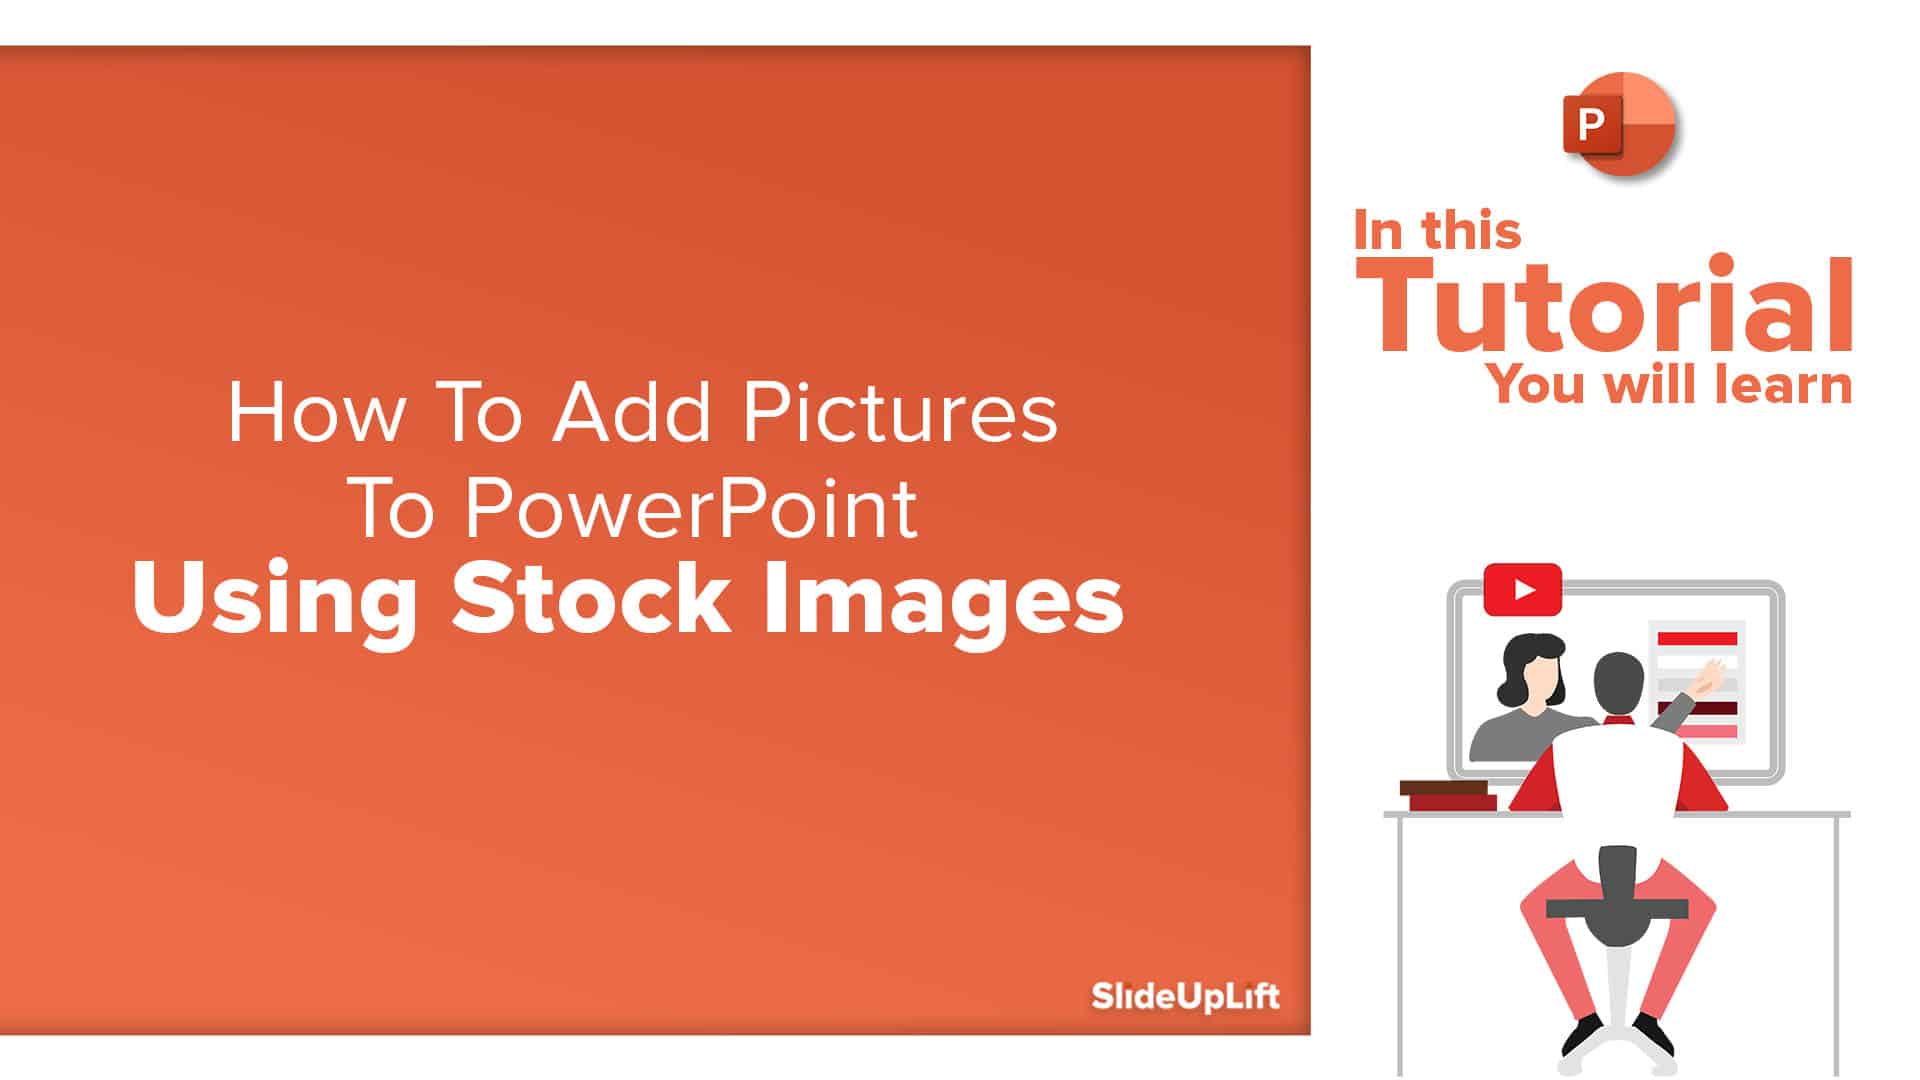 How To Add Pictures To PowerPoint Using Stock Images